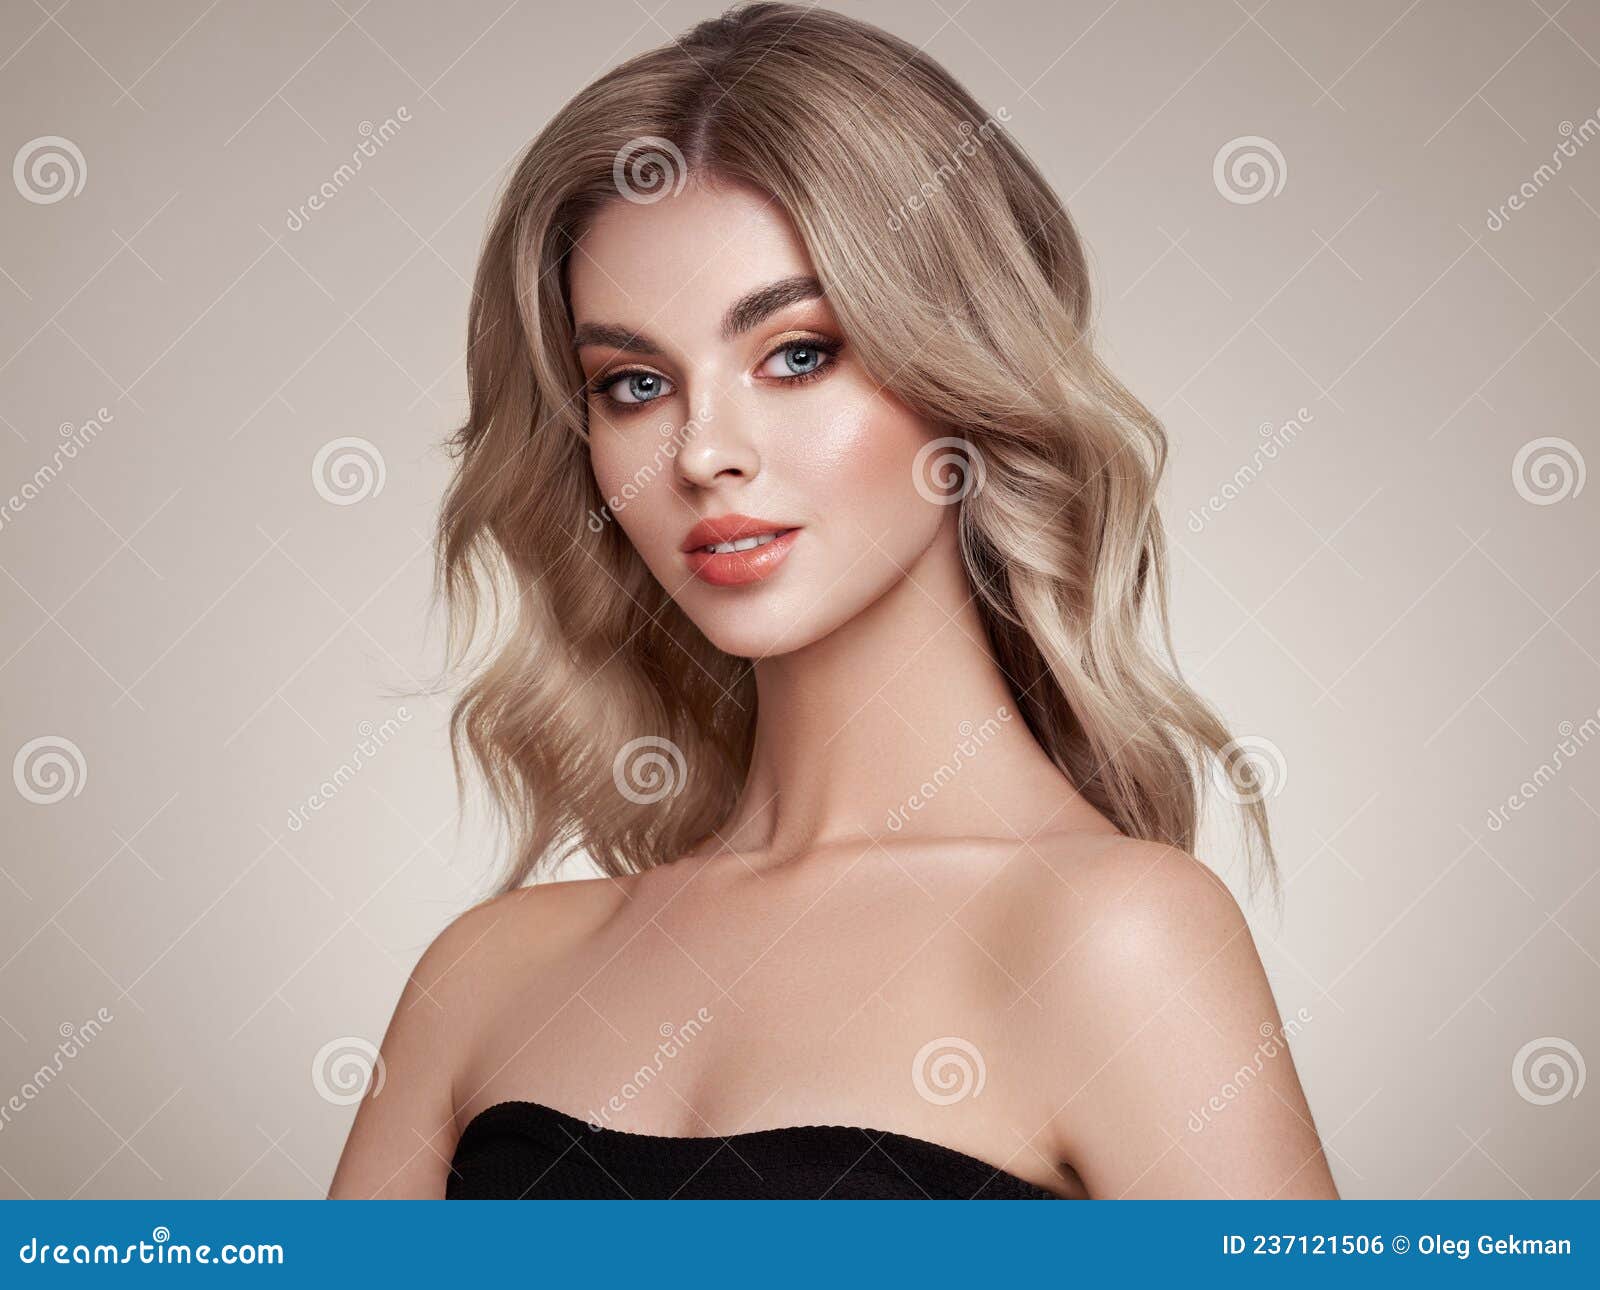 A Beautiful Young Woman With Shiny Wavy Blonde Hair Stock Photo Image